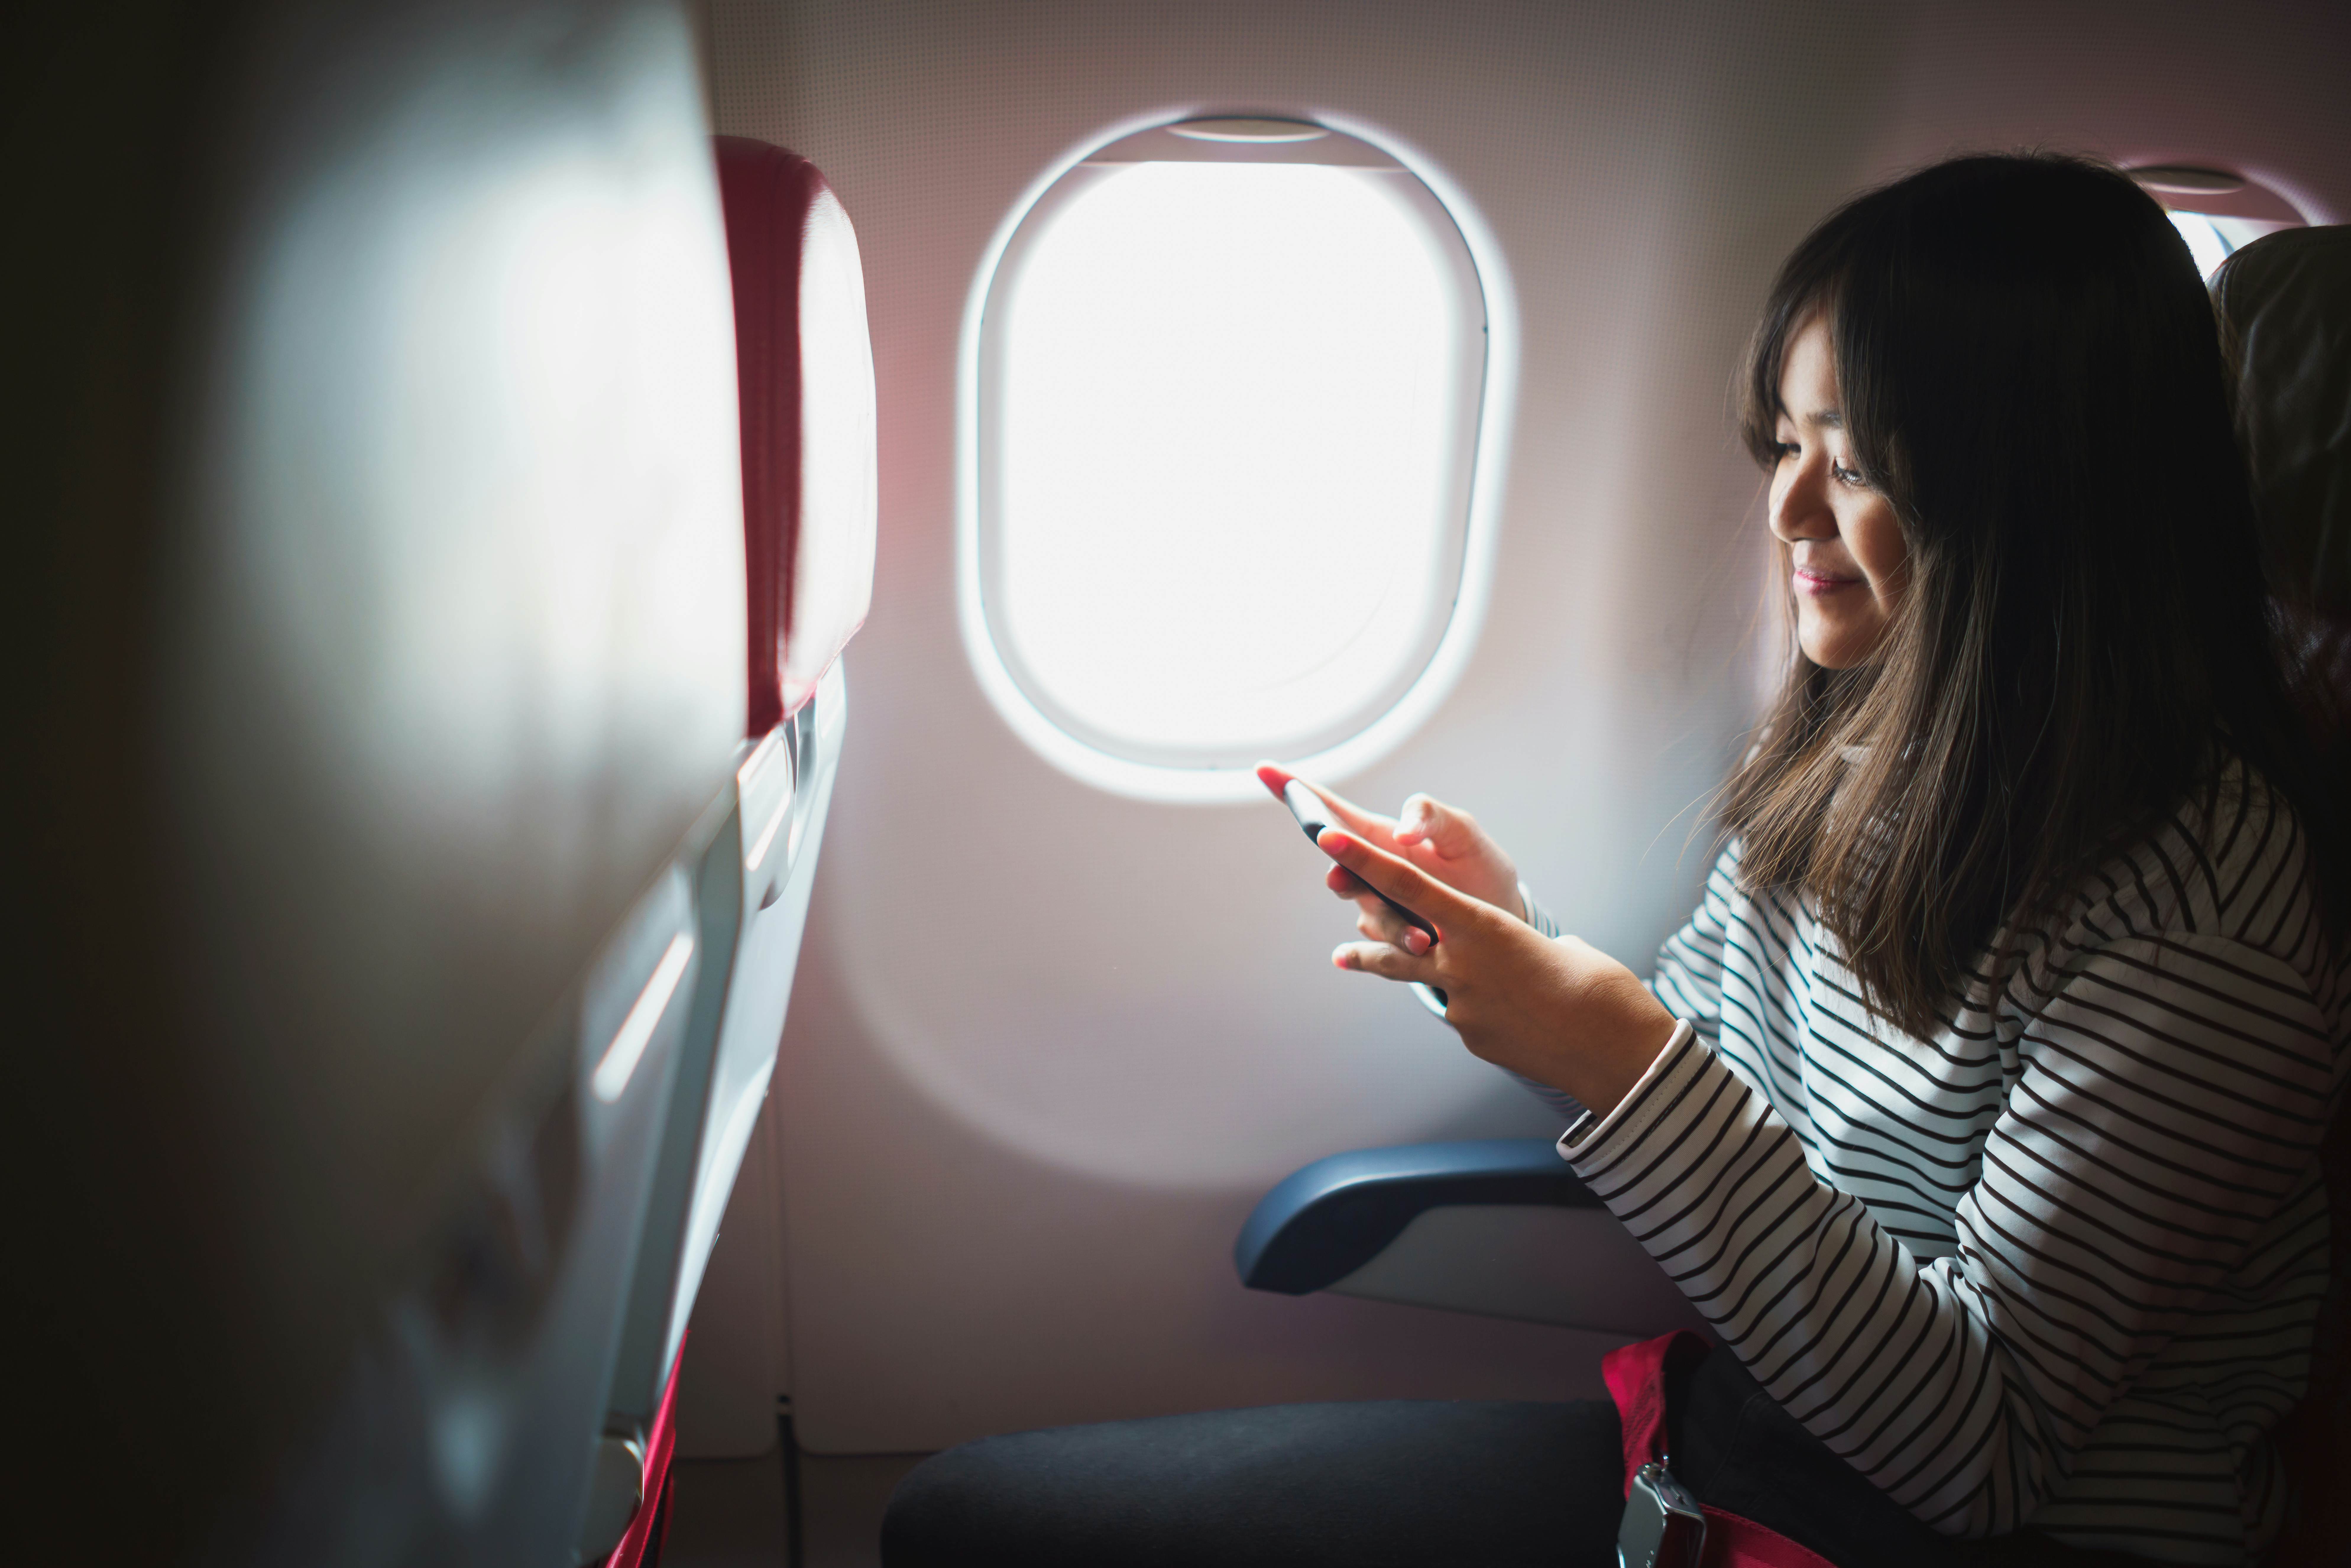 What happens if you don't put your phone in airplane mode - wcngg.com